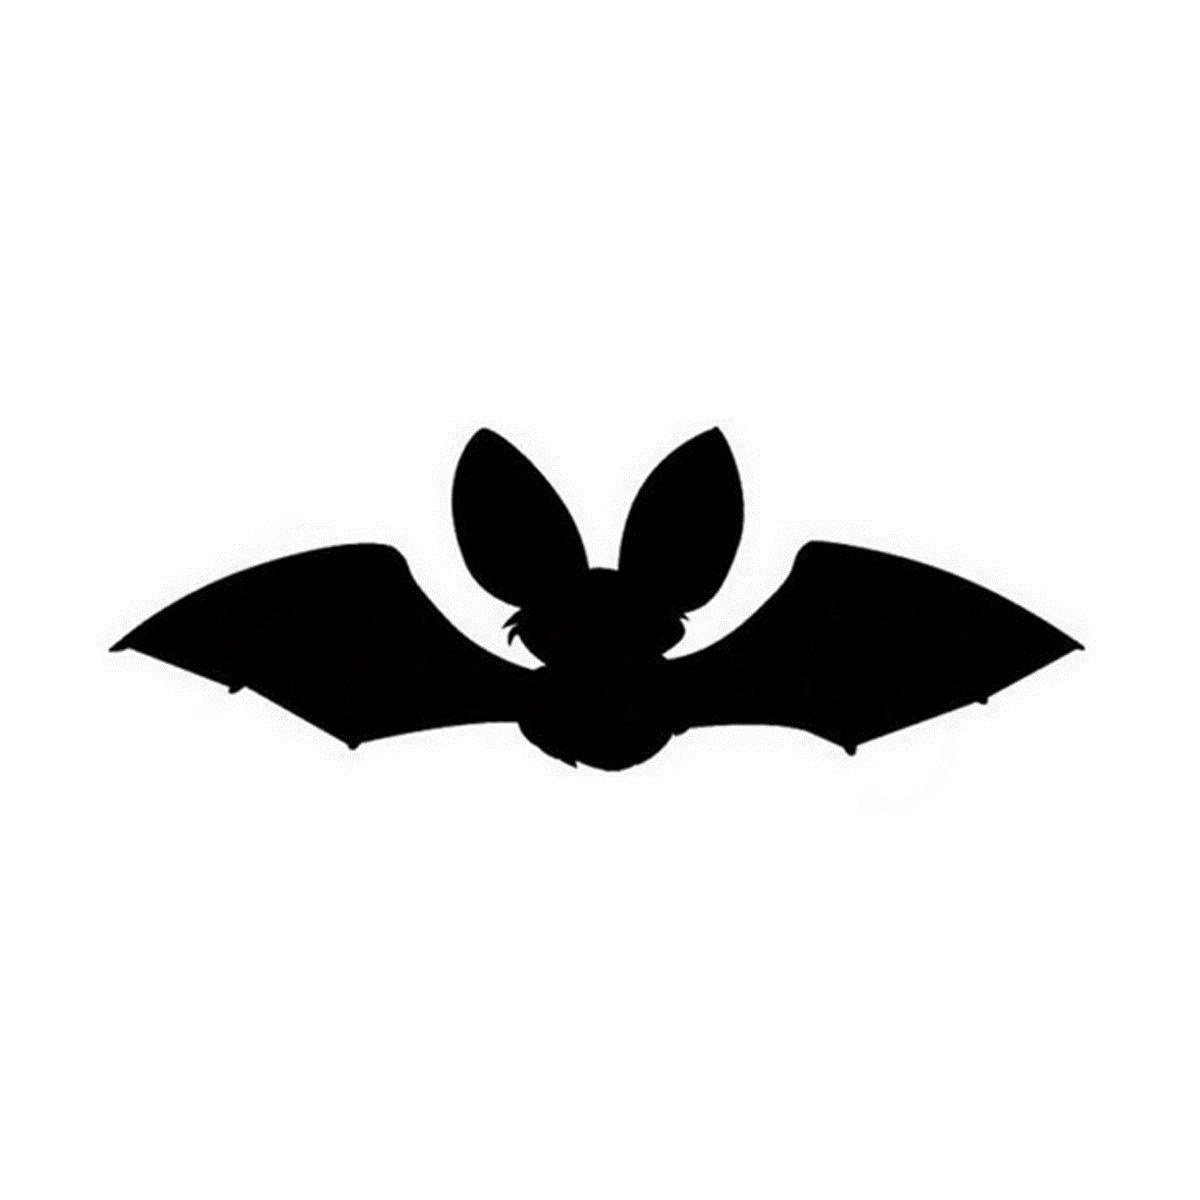 Bat Silhouette Images for Logo - Online Shop Cute Baby Bat Silhouette Cartoon Car-Styling Wall Home ...